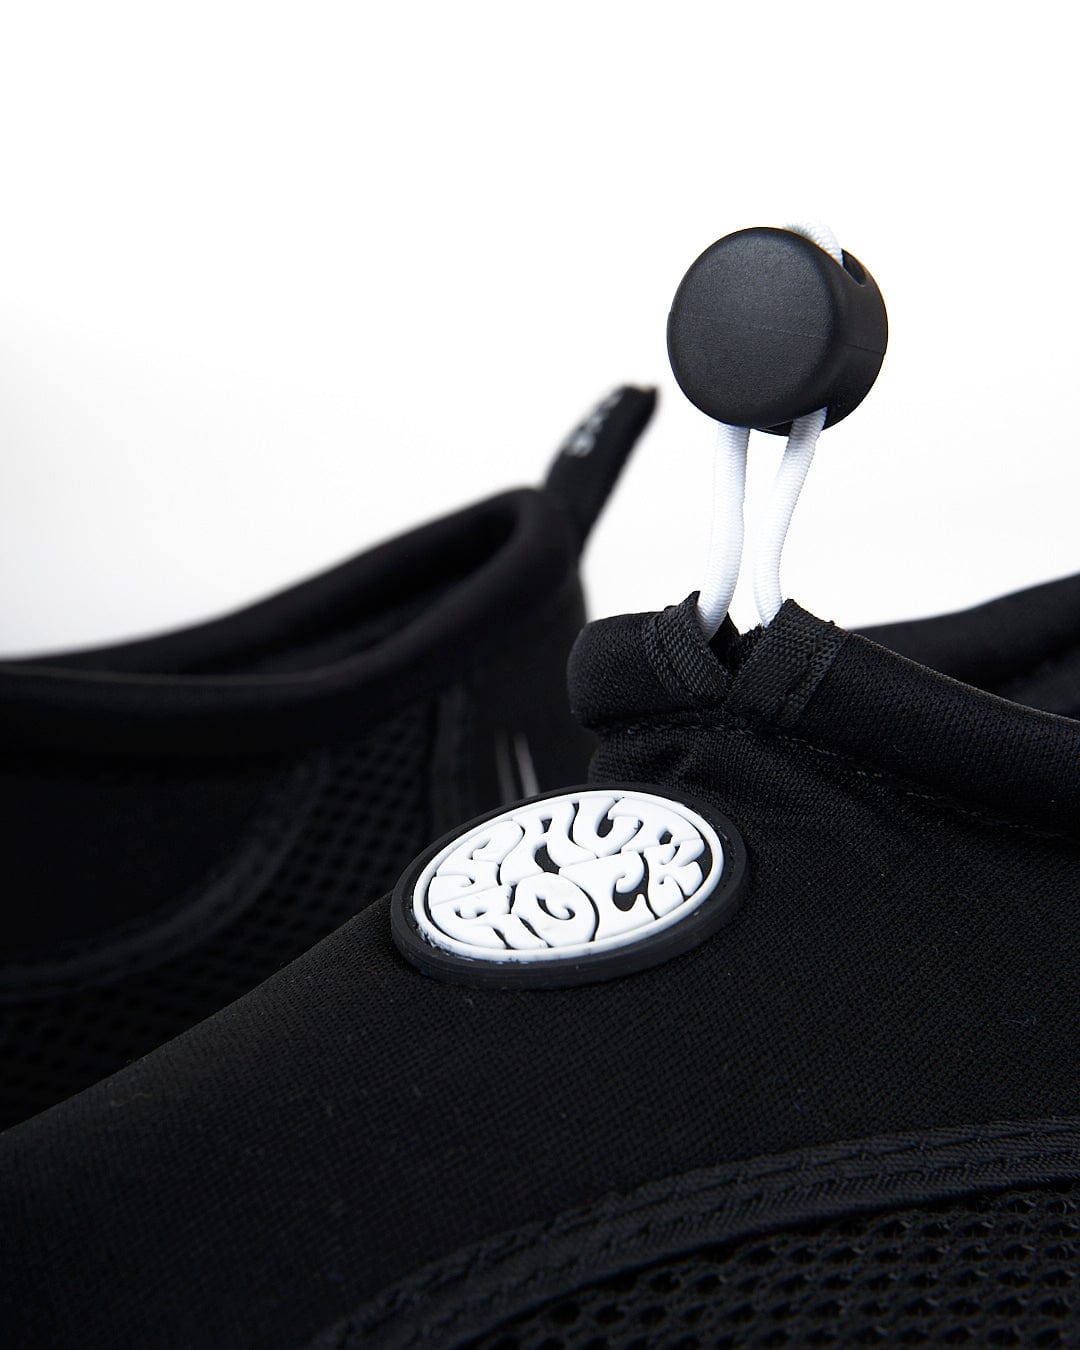 Close-up view of a black Saltrock Core Aqua Shoe fabric with a zipper and a distinctive round logo on a pull tab.